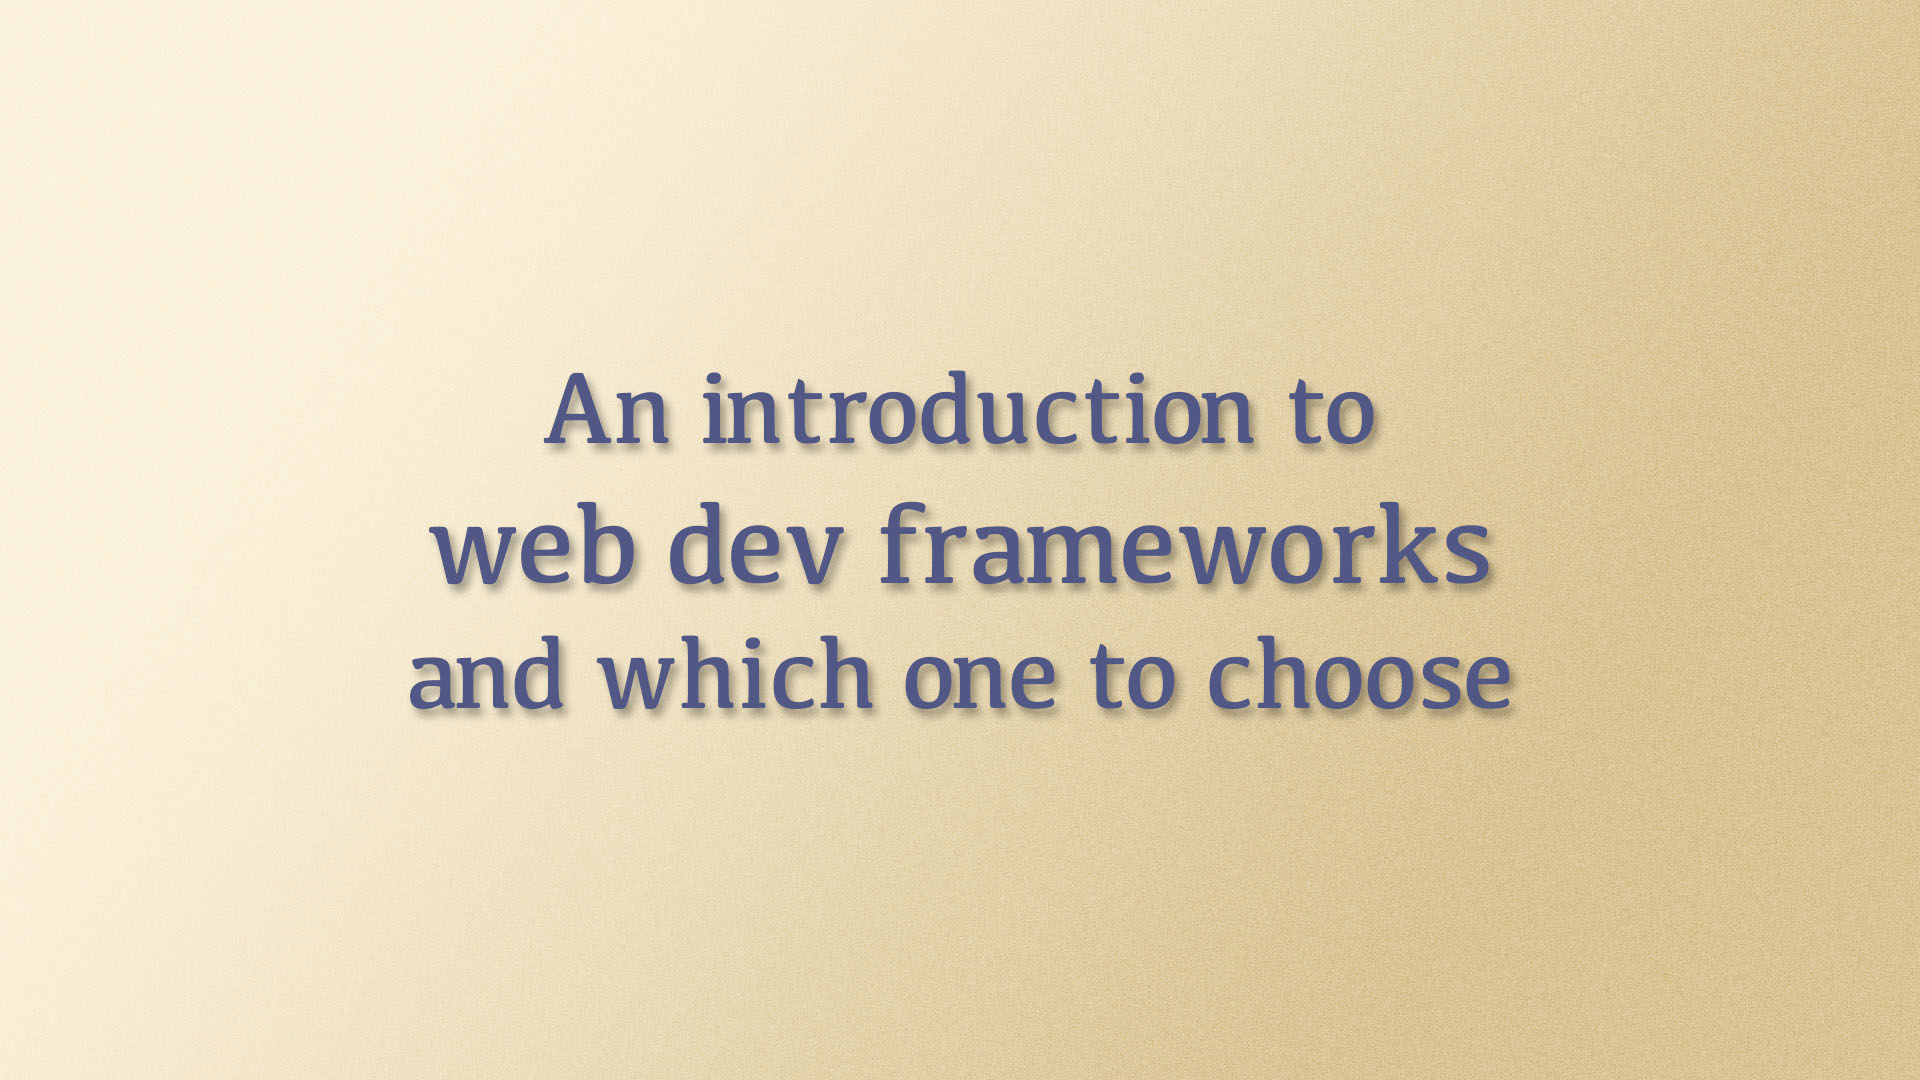 An introduction to web development frameworks and which one to choose